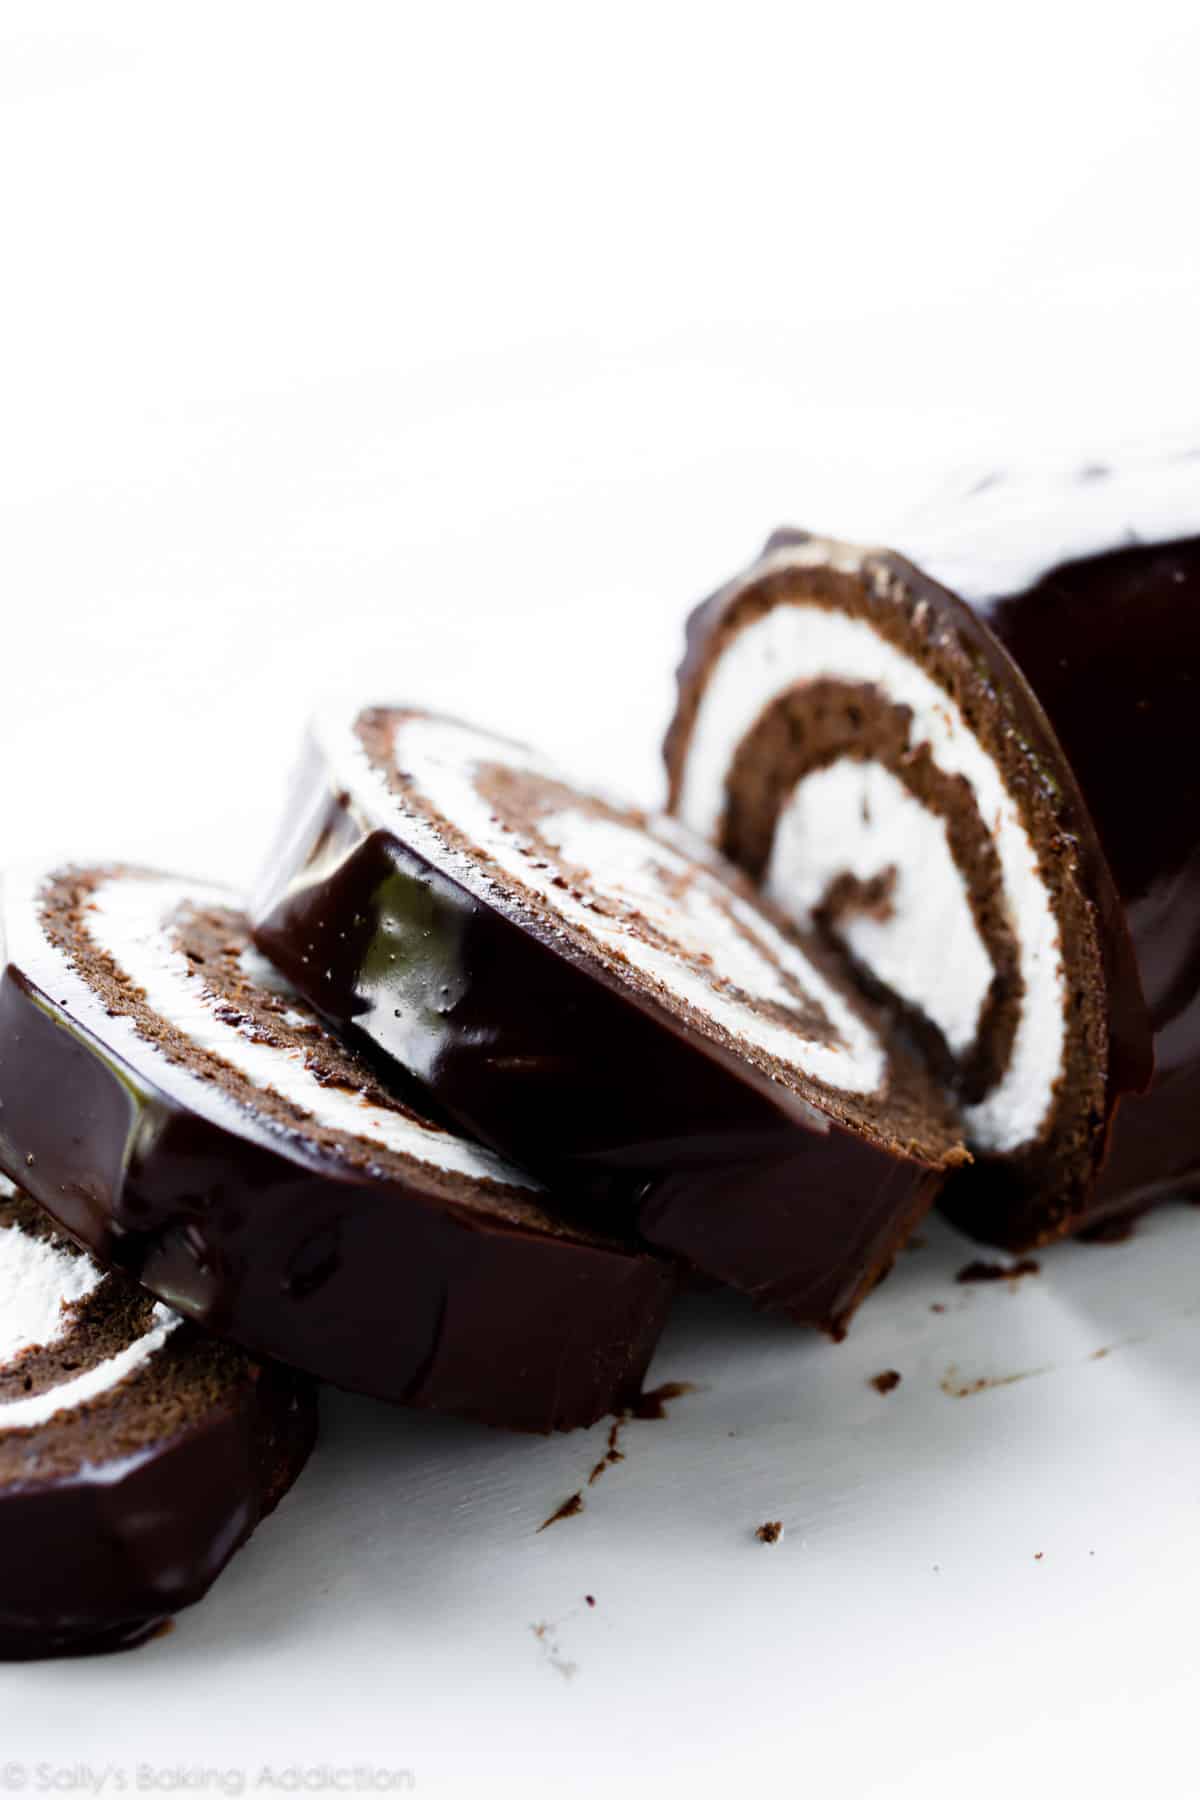 Chocolate Swiss roll cake cut into slices